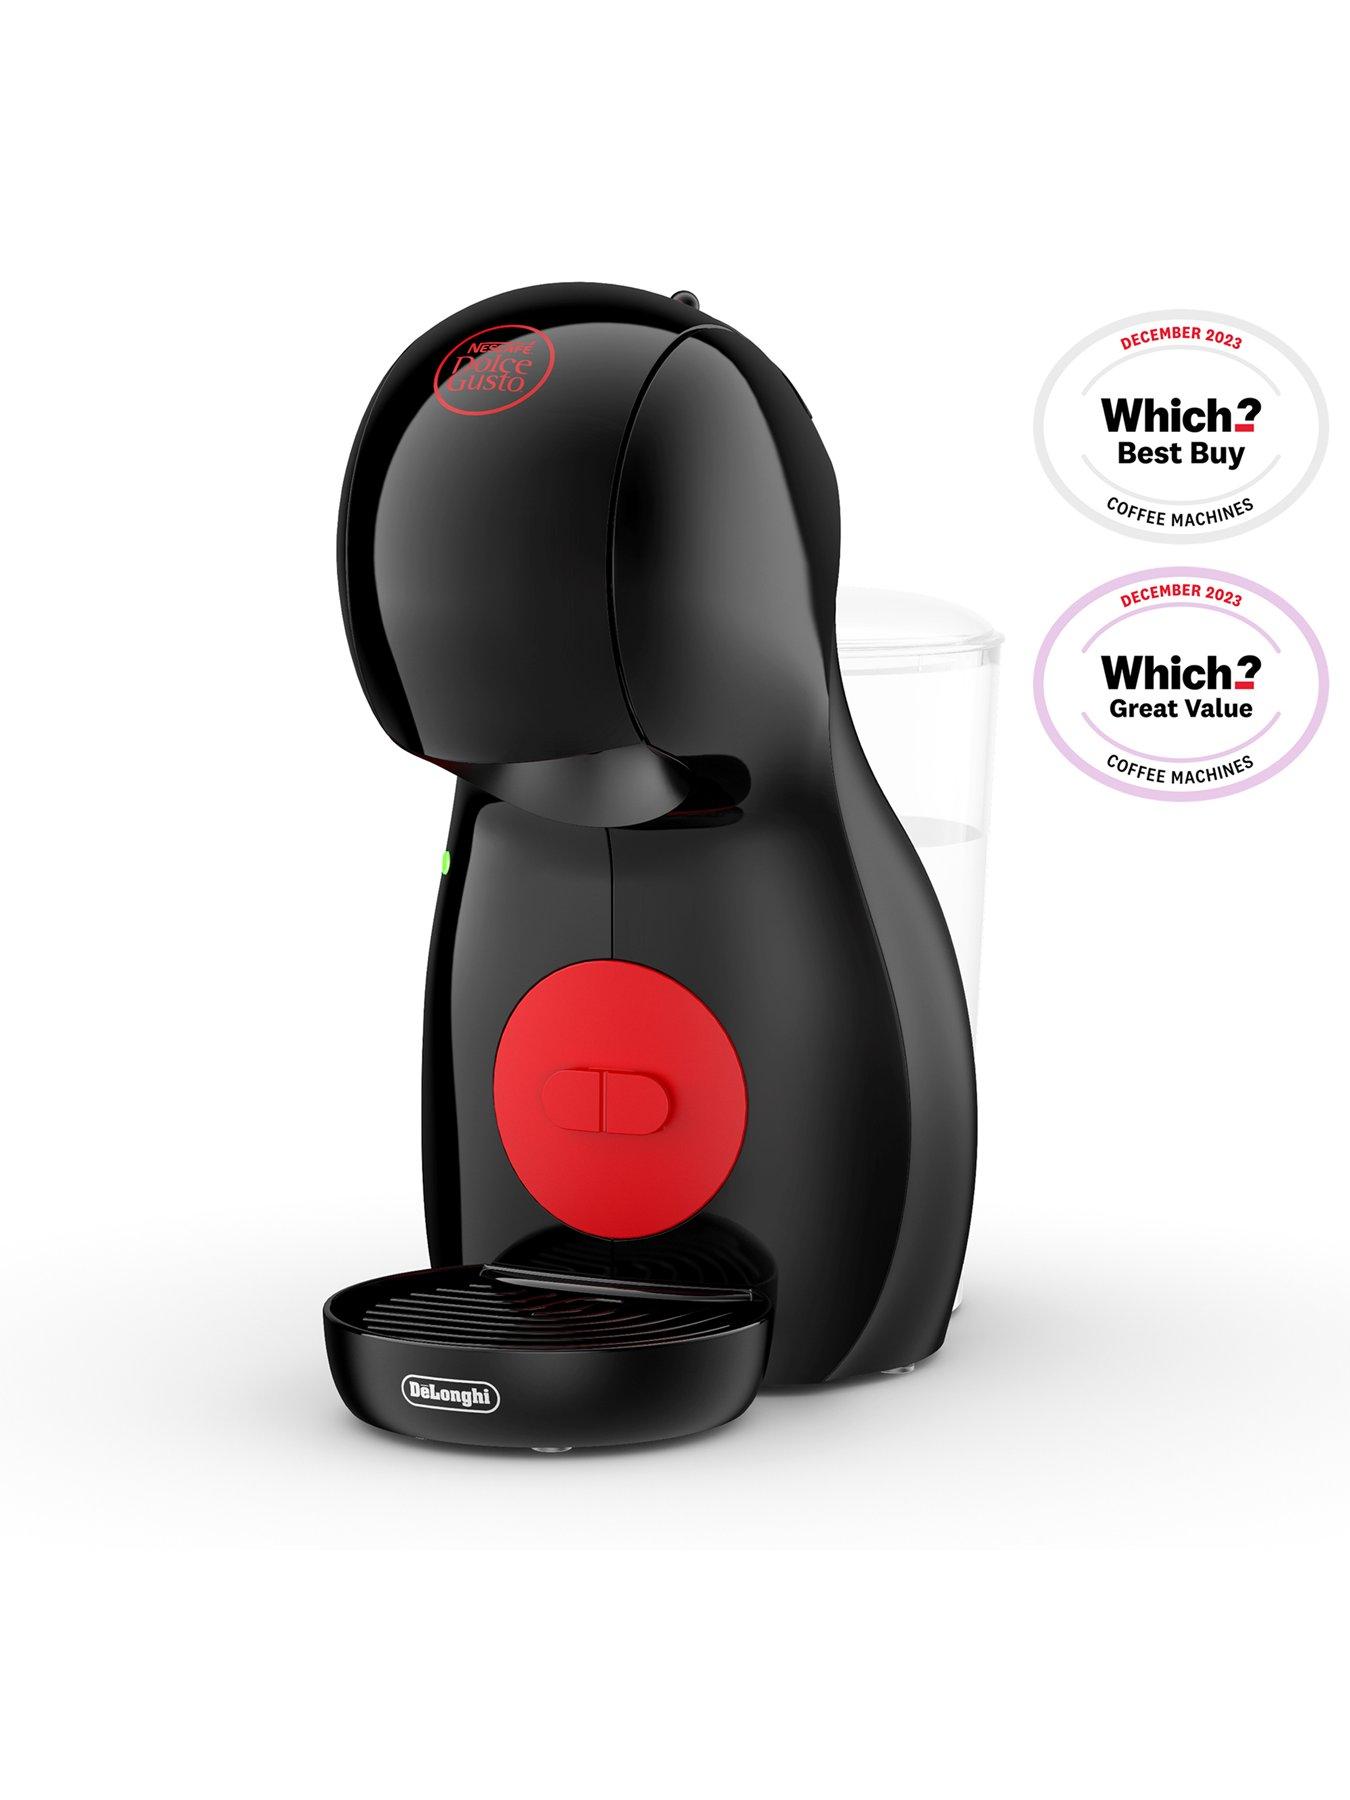 How to Use: Nescafe Dolce Gusto Coffee Machine by DeLonghi 